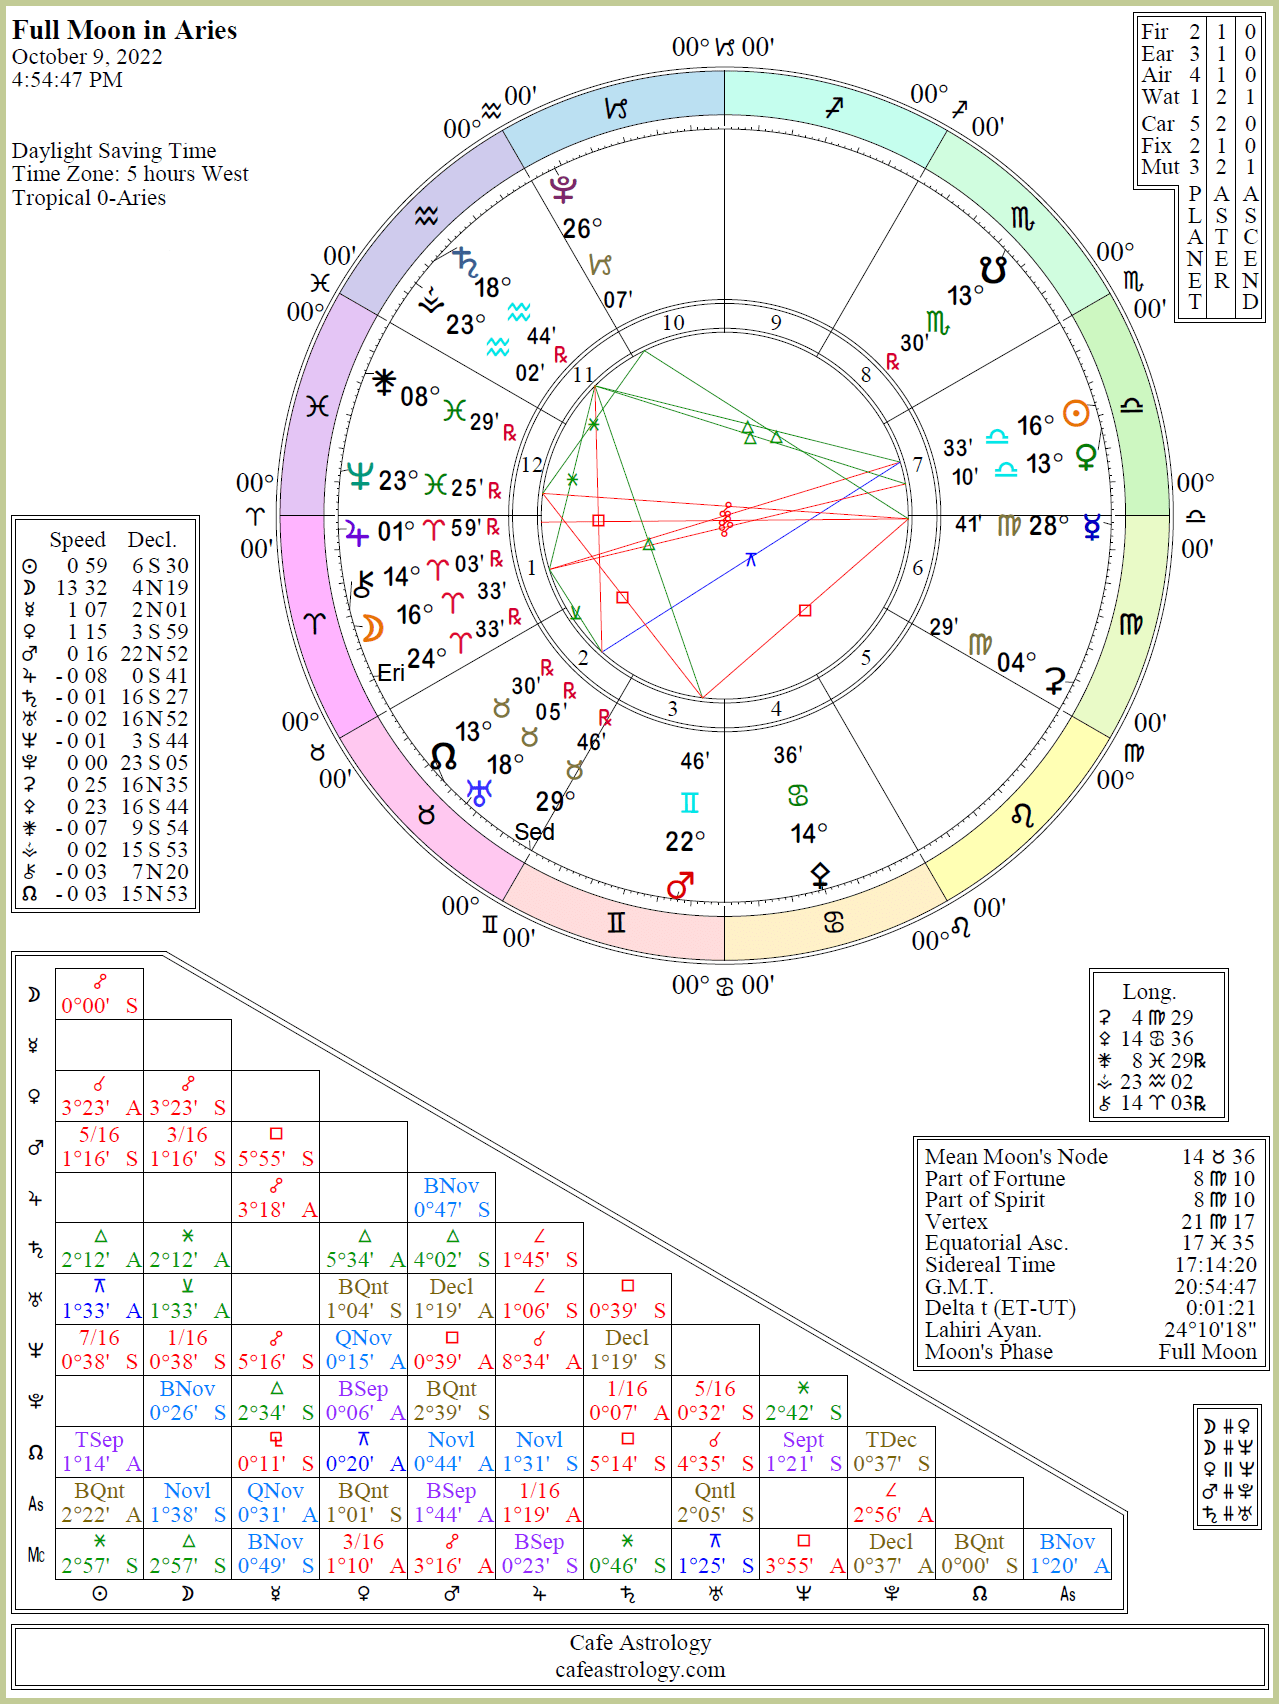 Full Moon on October 9, 2022 Cafe Astrology